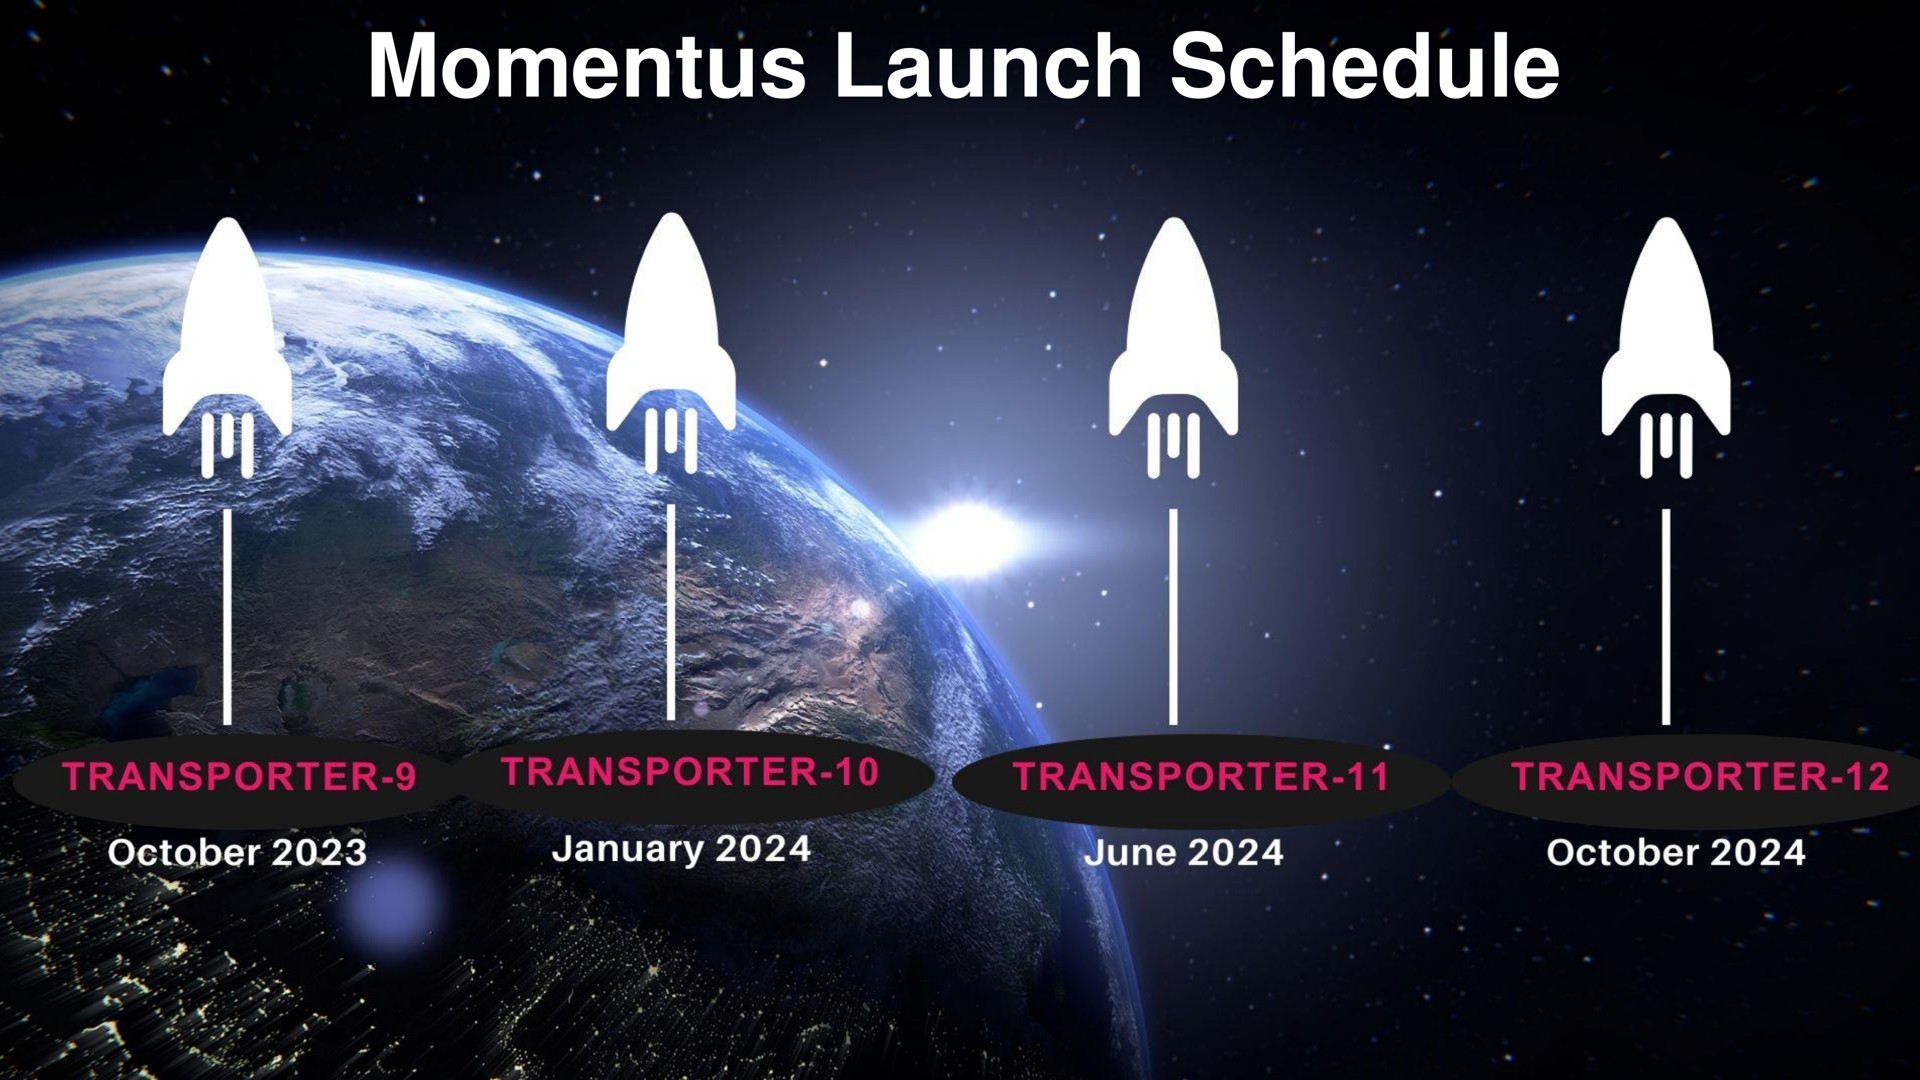 launch schedule a | Momentus